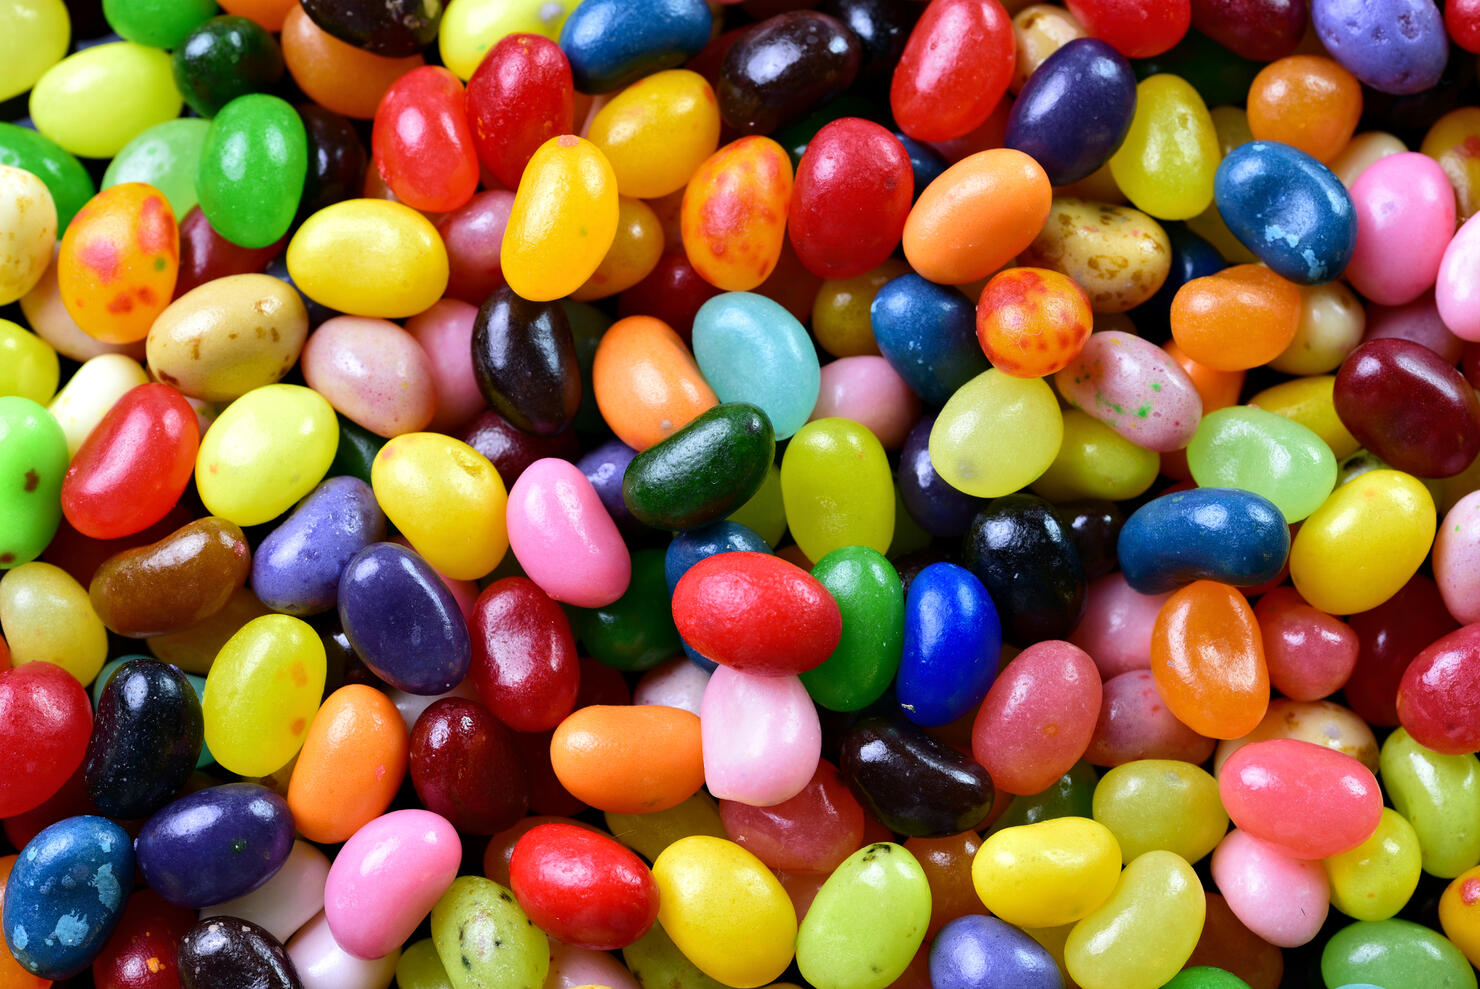 Amy's Pile: Buttered Popcorn Is The Most Popular Jelly Bean Flavor.